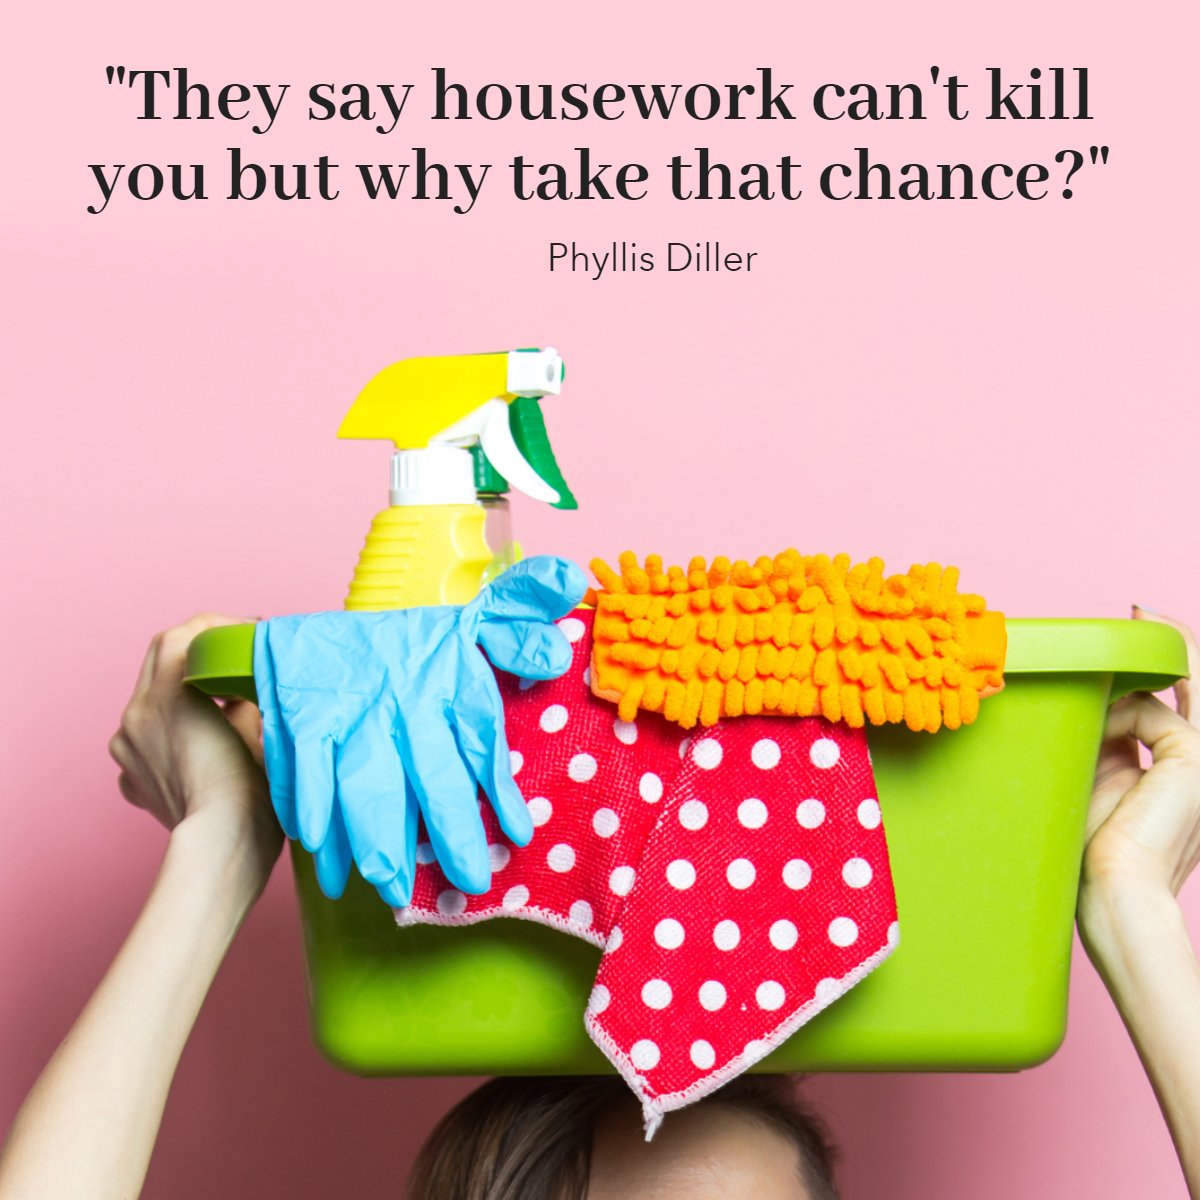 'They say, housework can't kill you, but why take that chance?'
— Phyllis Diller

#quoteoftheday #quotestagram #lifequotes #realestate #quotes 
 #riscosells #theriscogroup #kwmainline #Uptownliving